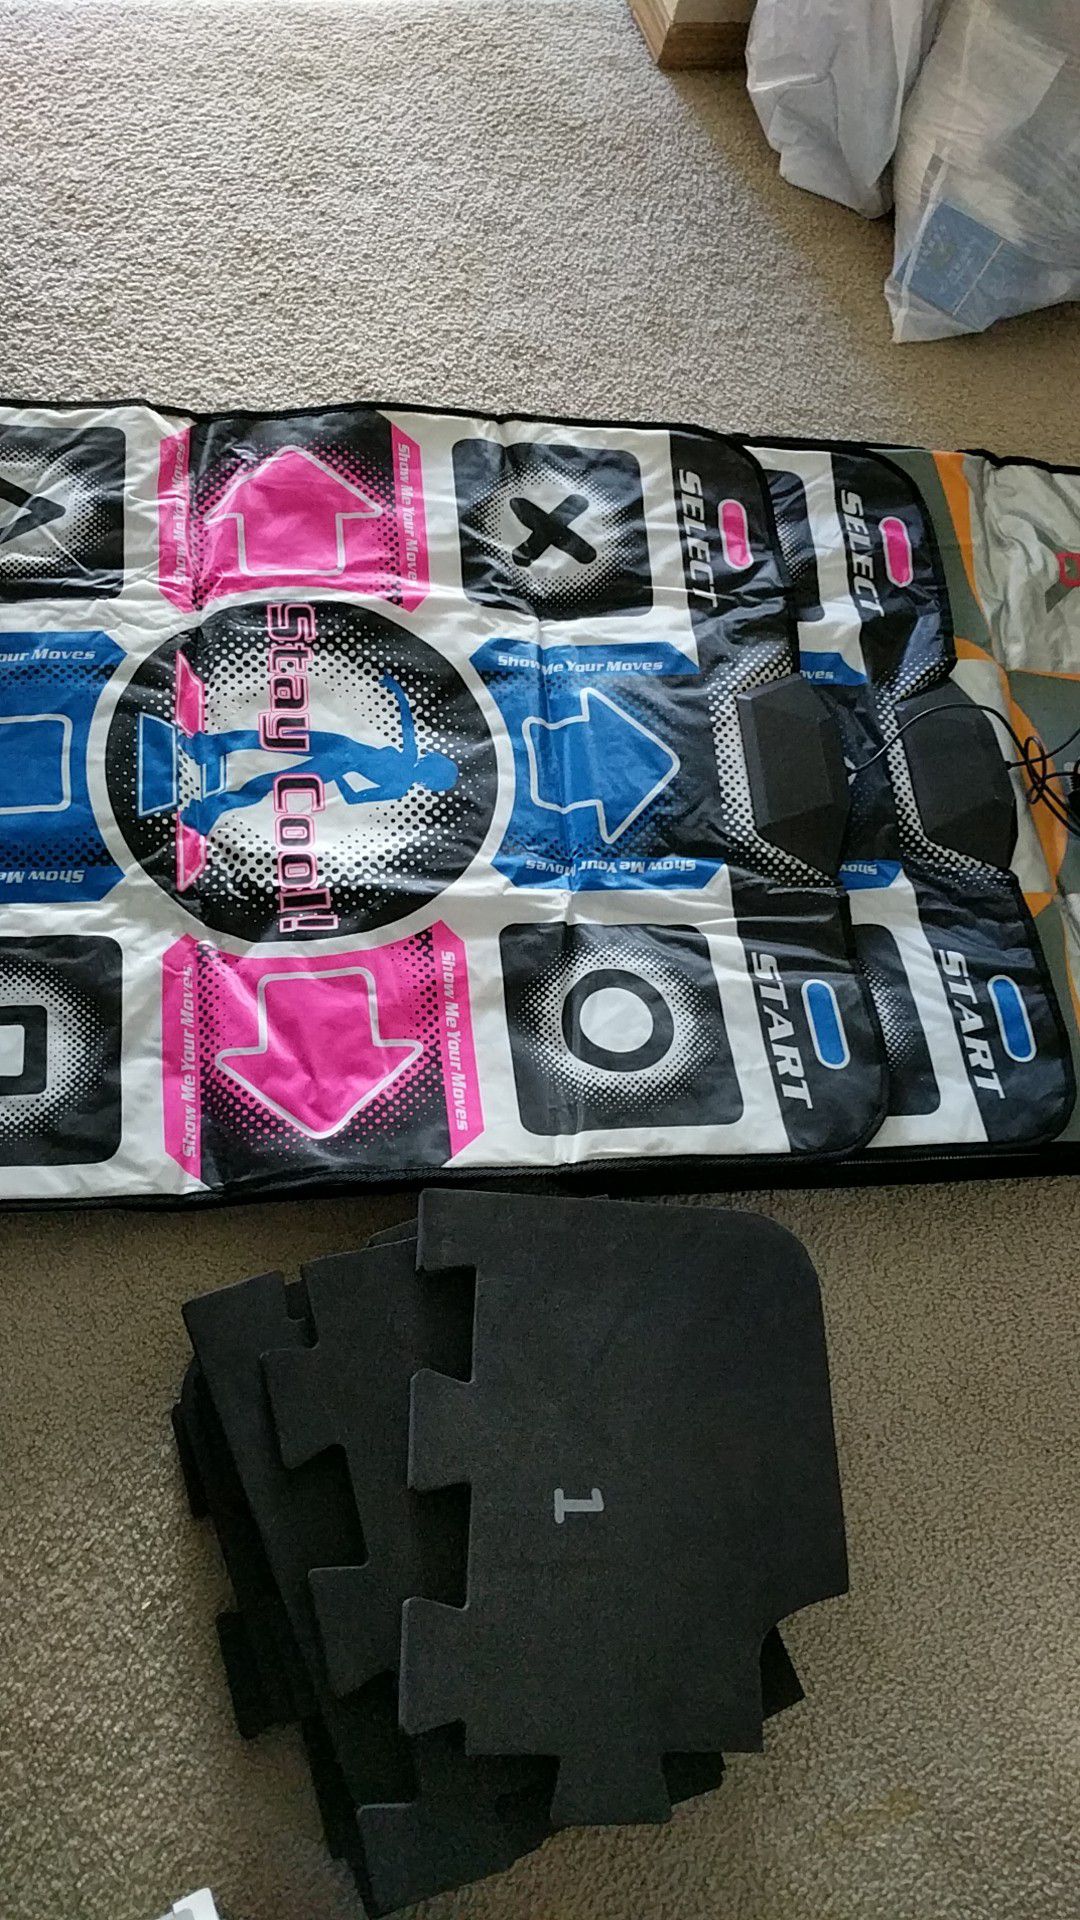 Ps2 PS3 and PS4 3 DDR mats dance dance revolution for PS3 or PS4